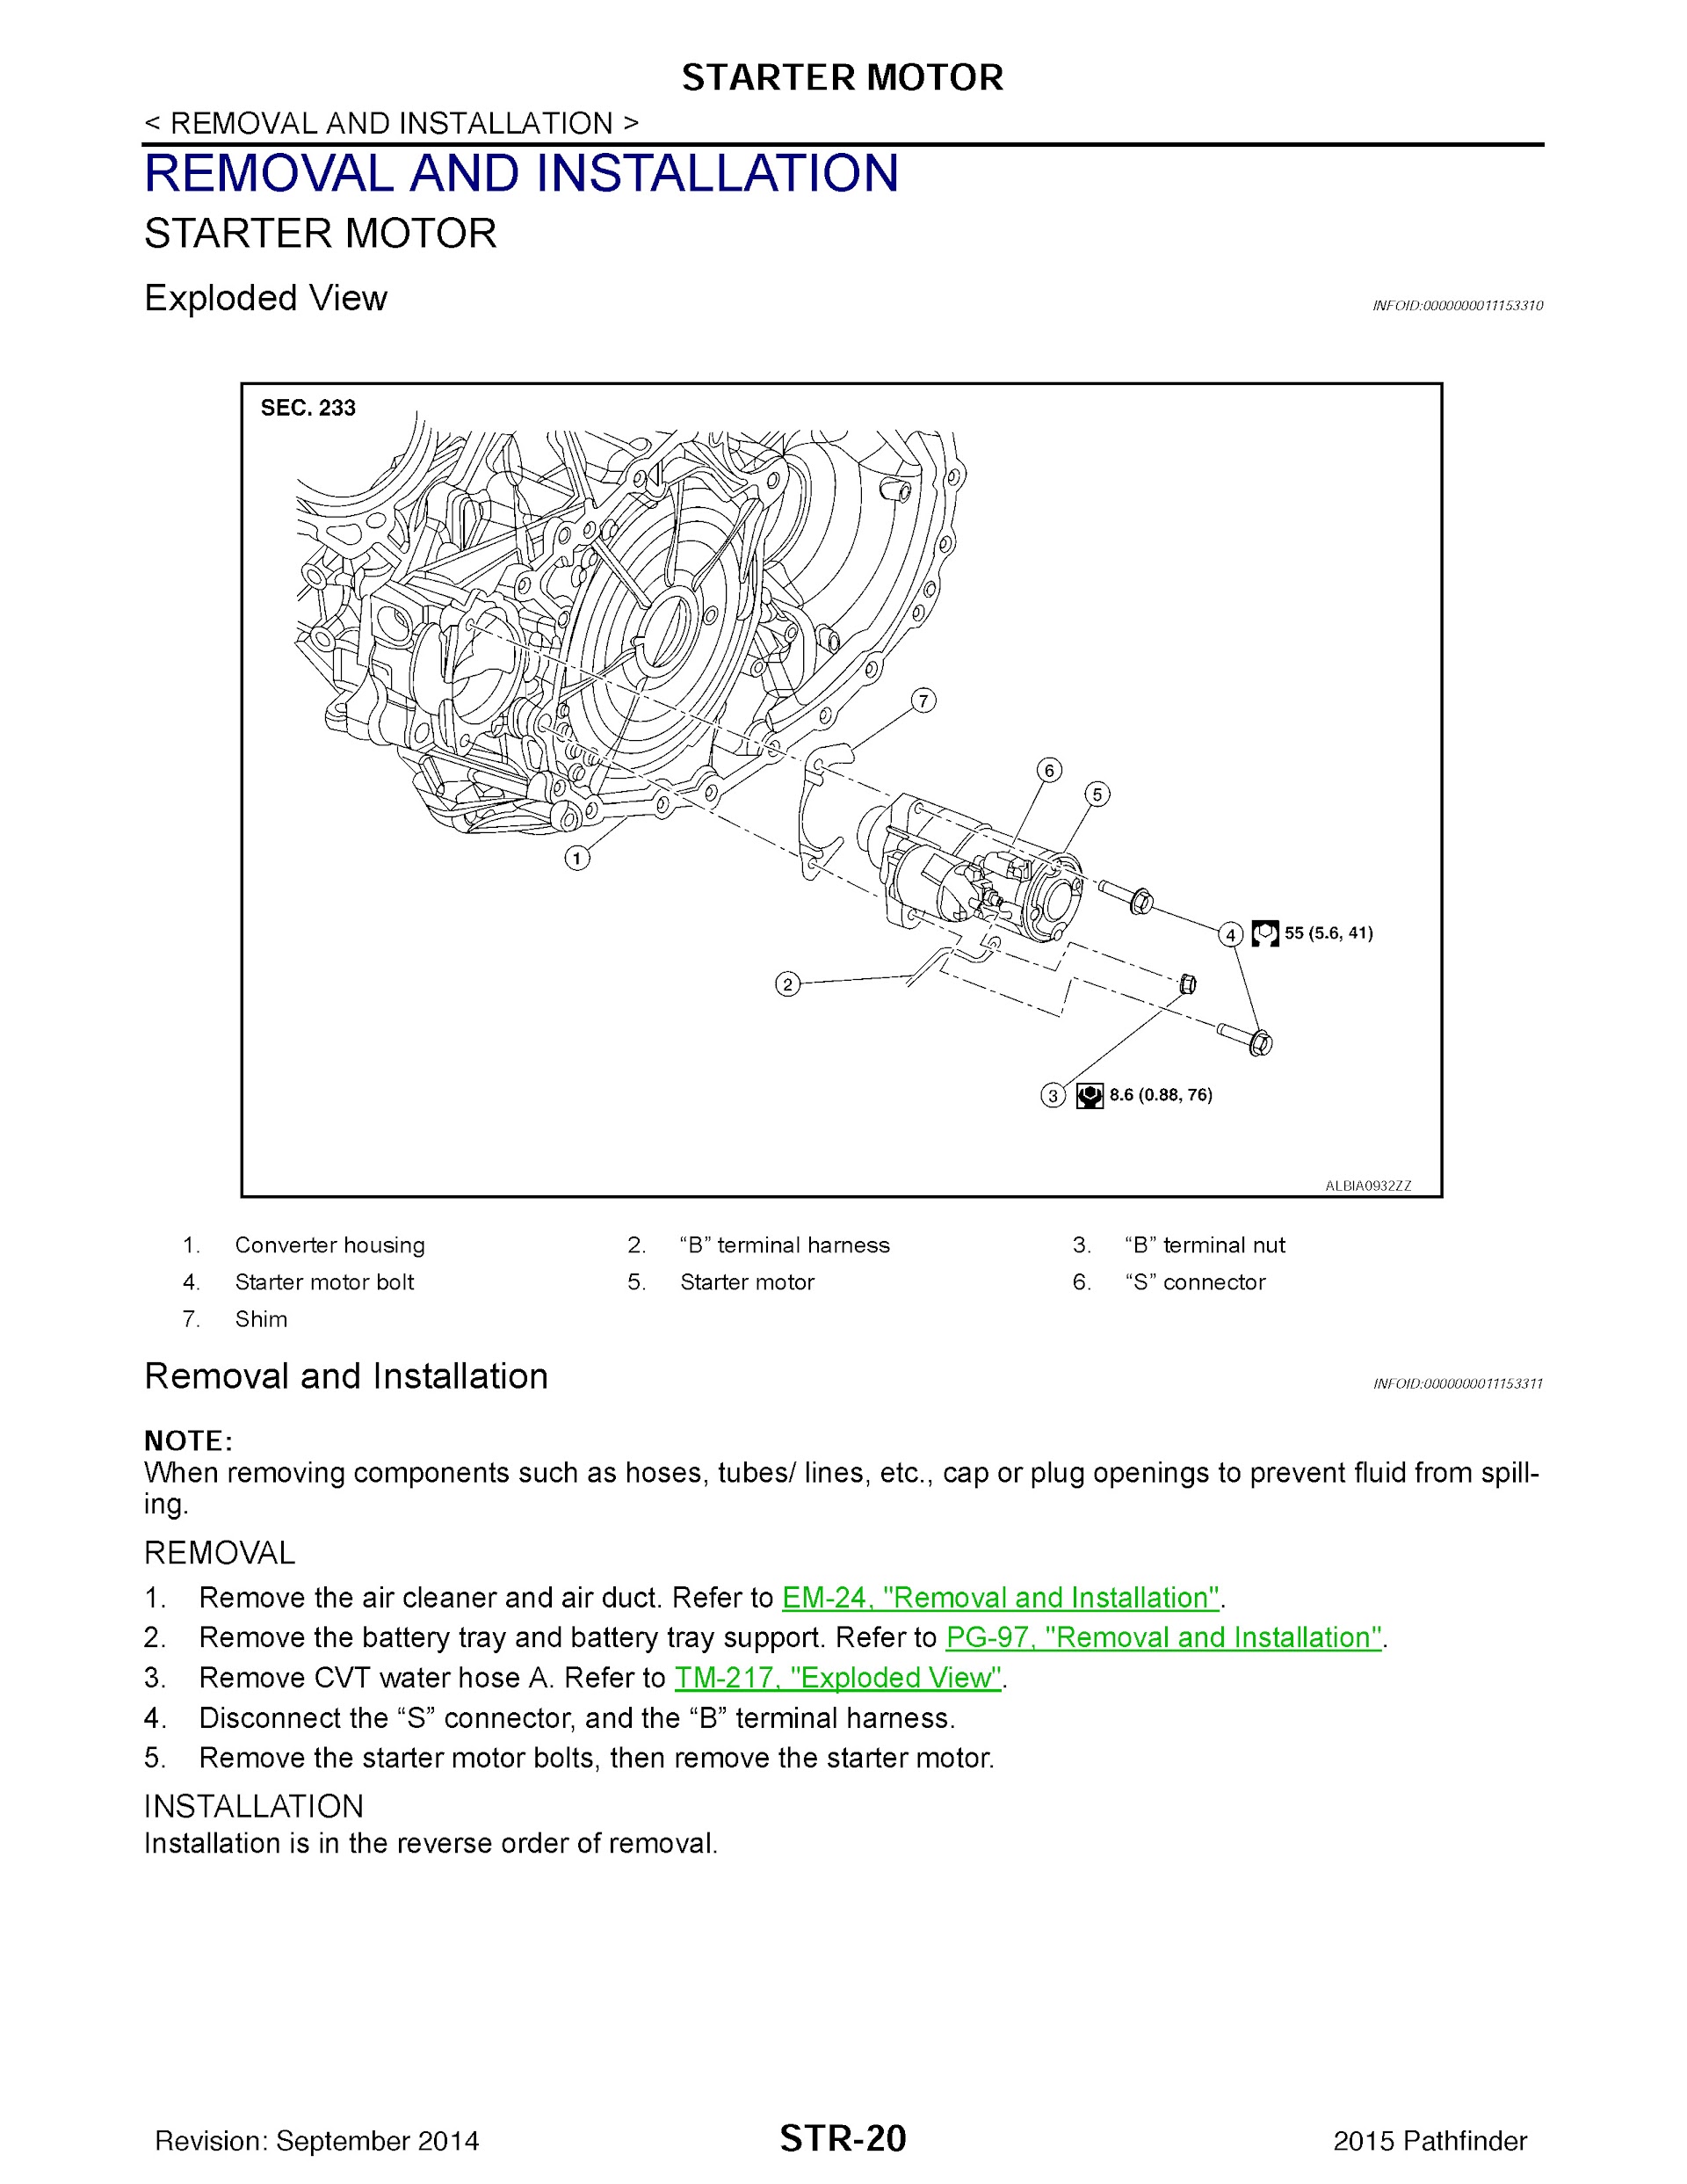 2015 Nissan Pathfinder Repair Manual, Starter Motor Removal and Installation